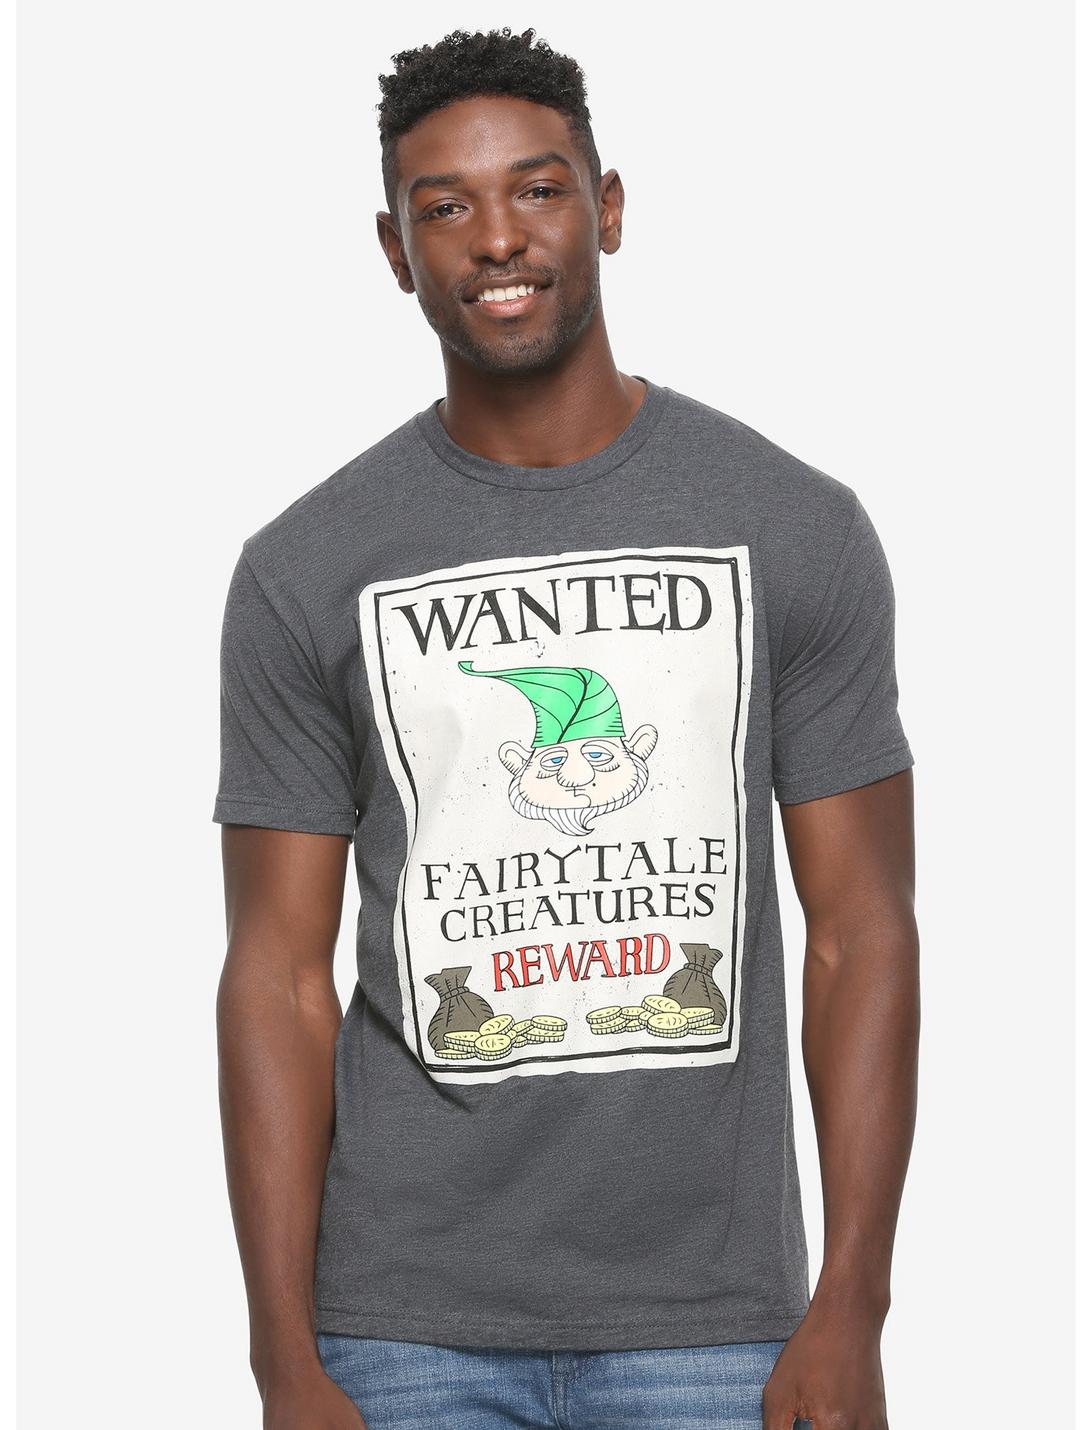 Shrek Fairytale Creatures Wanted T-Shirt - BoxLunch Exclusive, GREY, hi-res